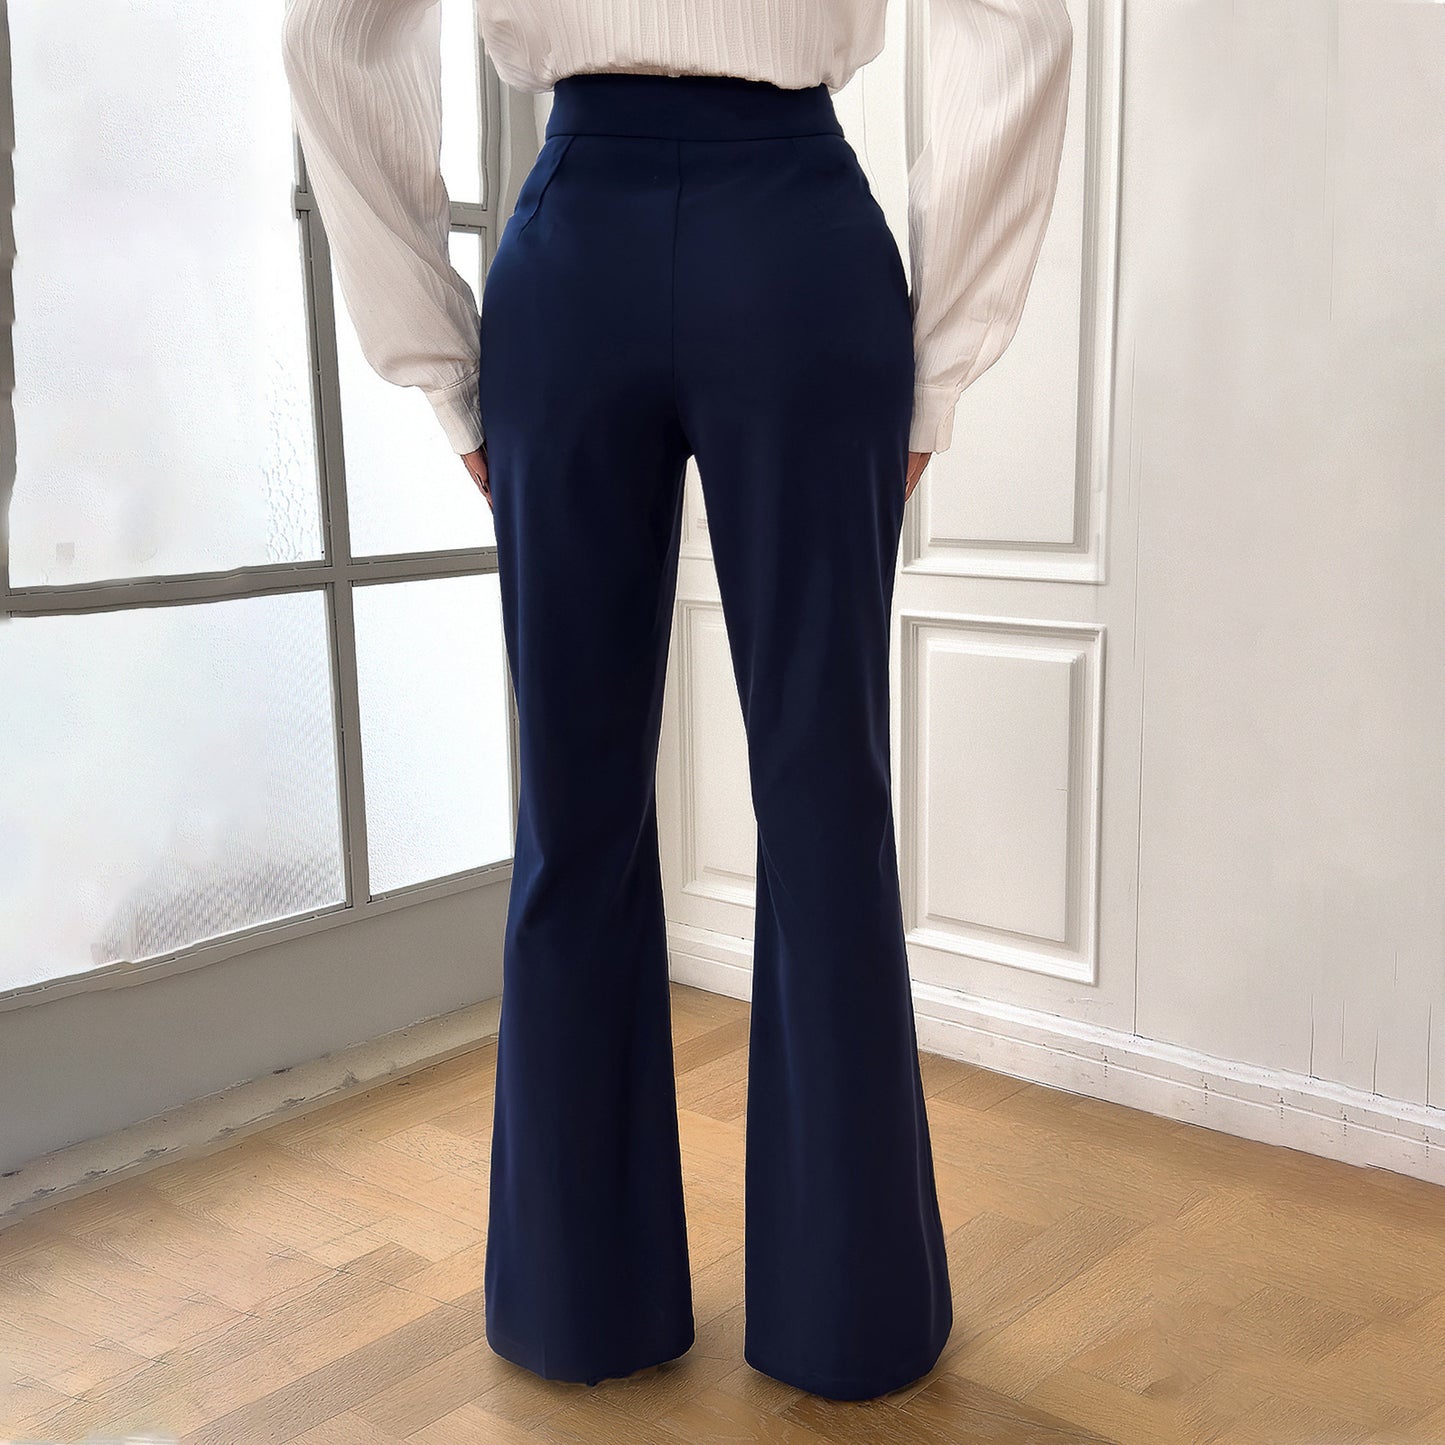 Women's Fashionable Elegant Solid Color Slim-fit Trousers apparel & accessories